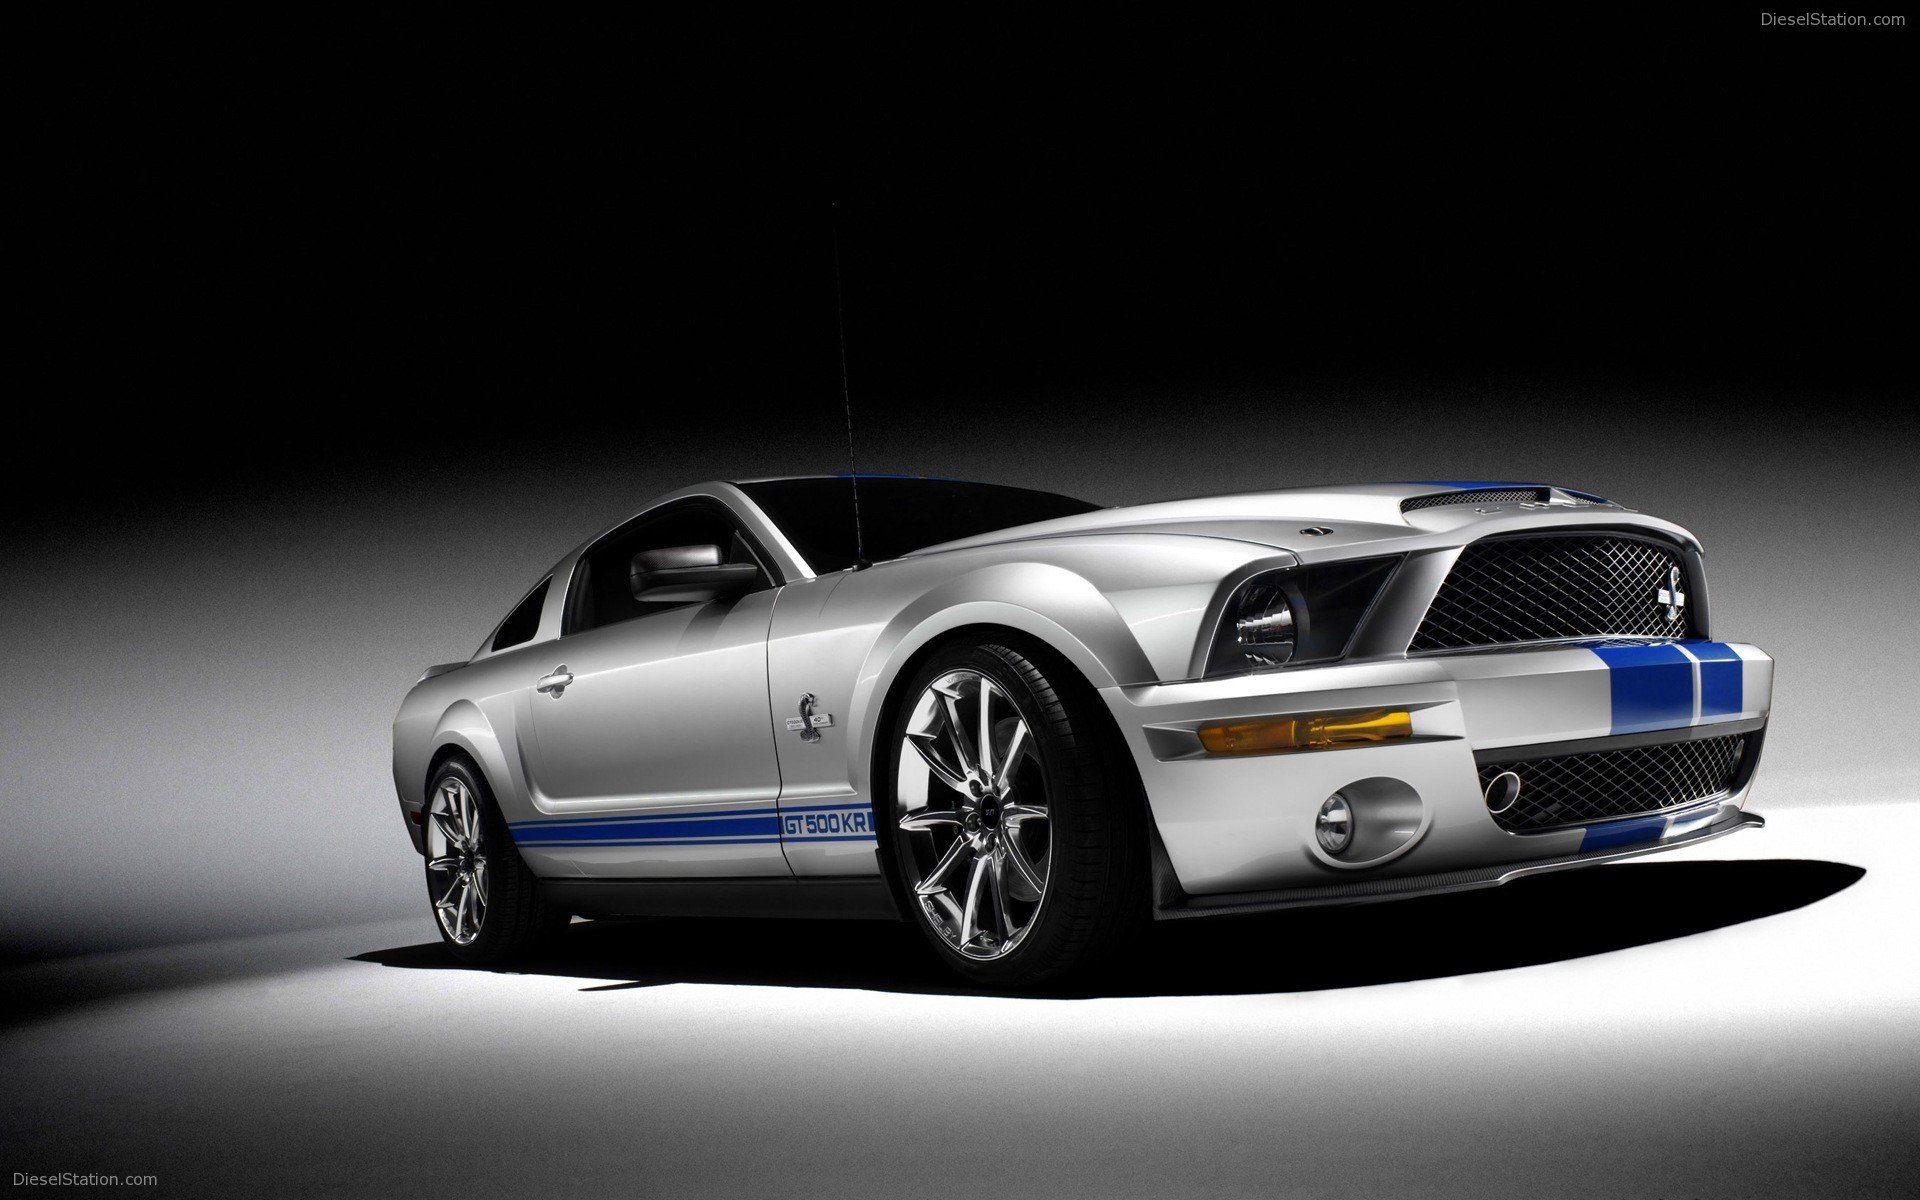 Ford Mustang Logo Wallpaper iPhone. Trendy Download Monster Energy